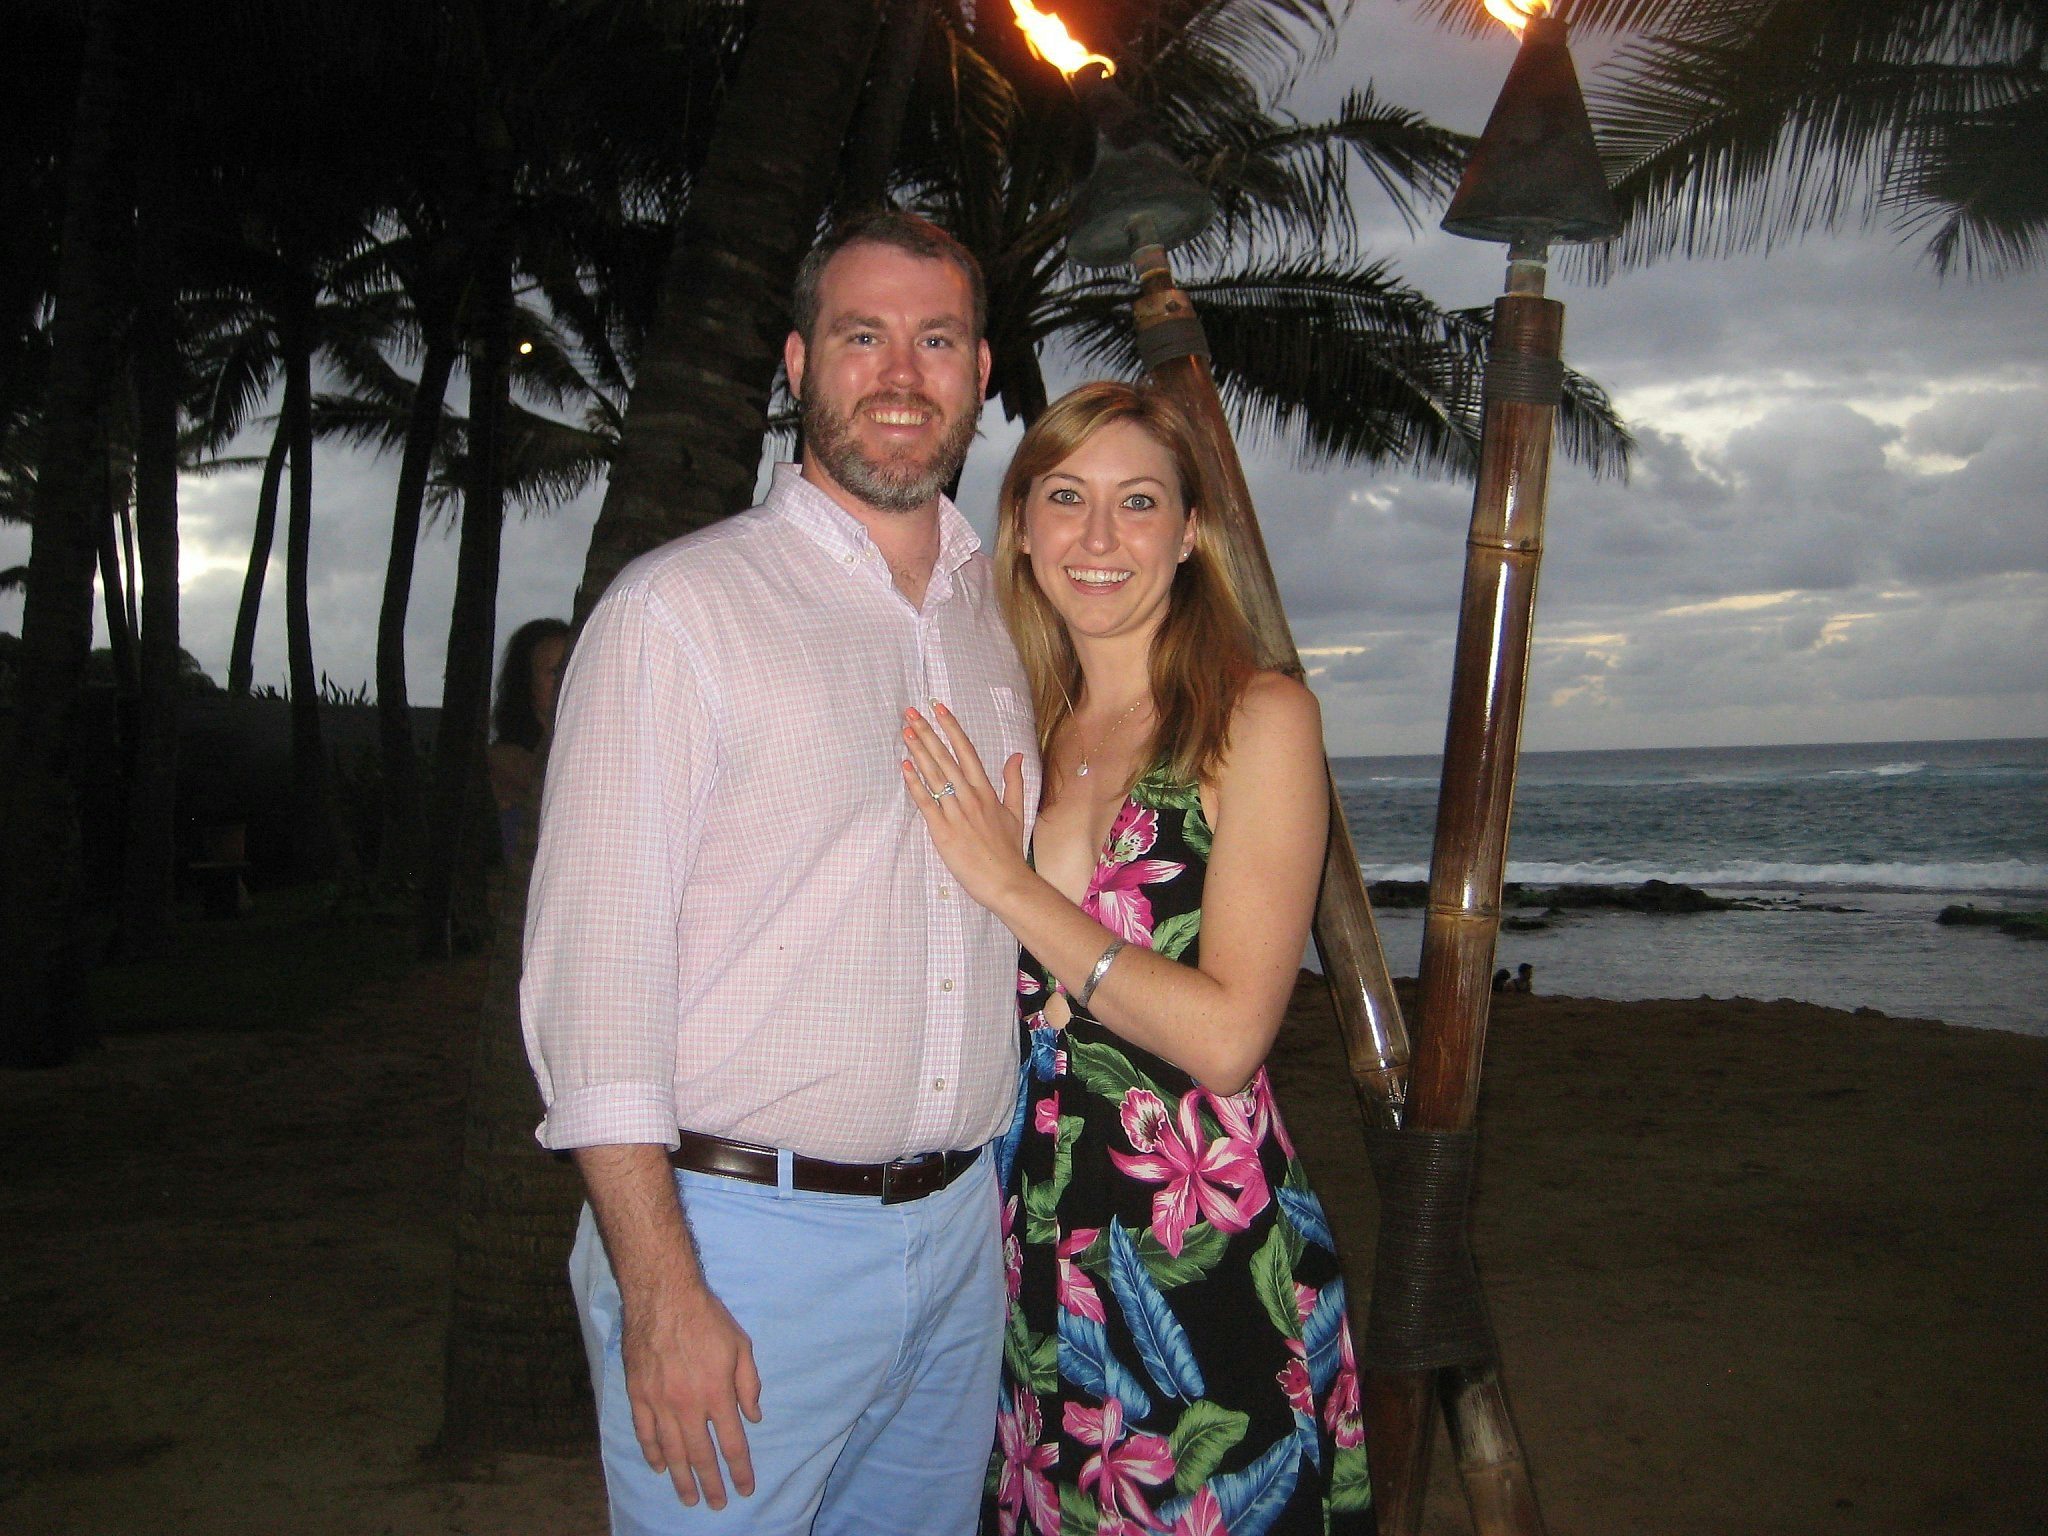 Lonely Planet staffer Nicole and her husband stand on a beach in Maui at dusk with palm trees and the ocean behind them; the couple look happy and Nicole rests her hand on her partner's chest to show off her engagement ring.